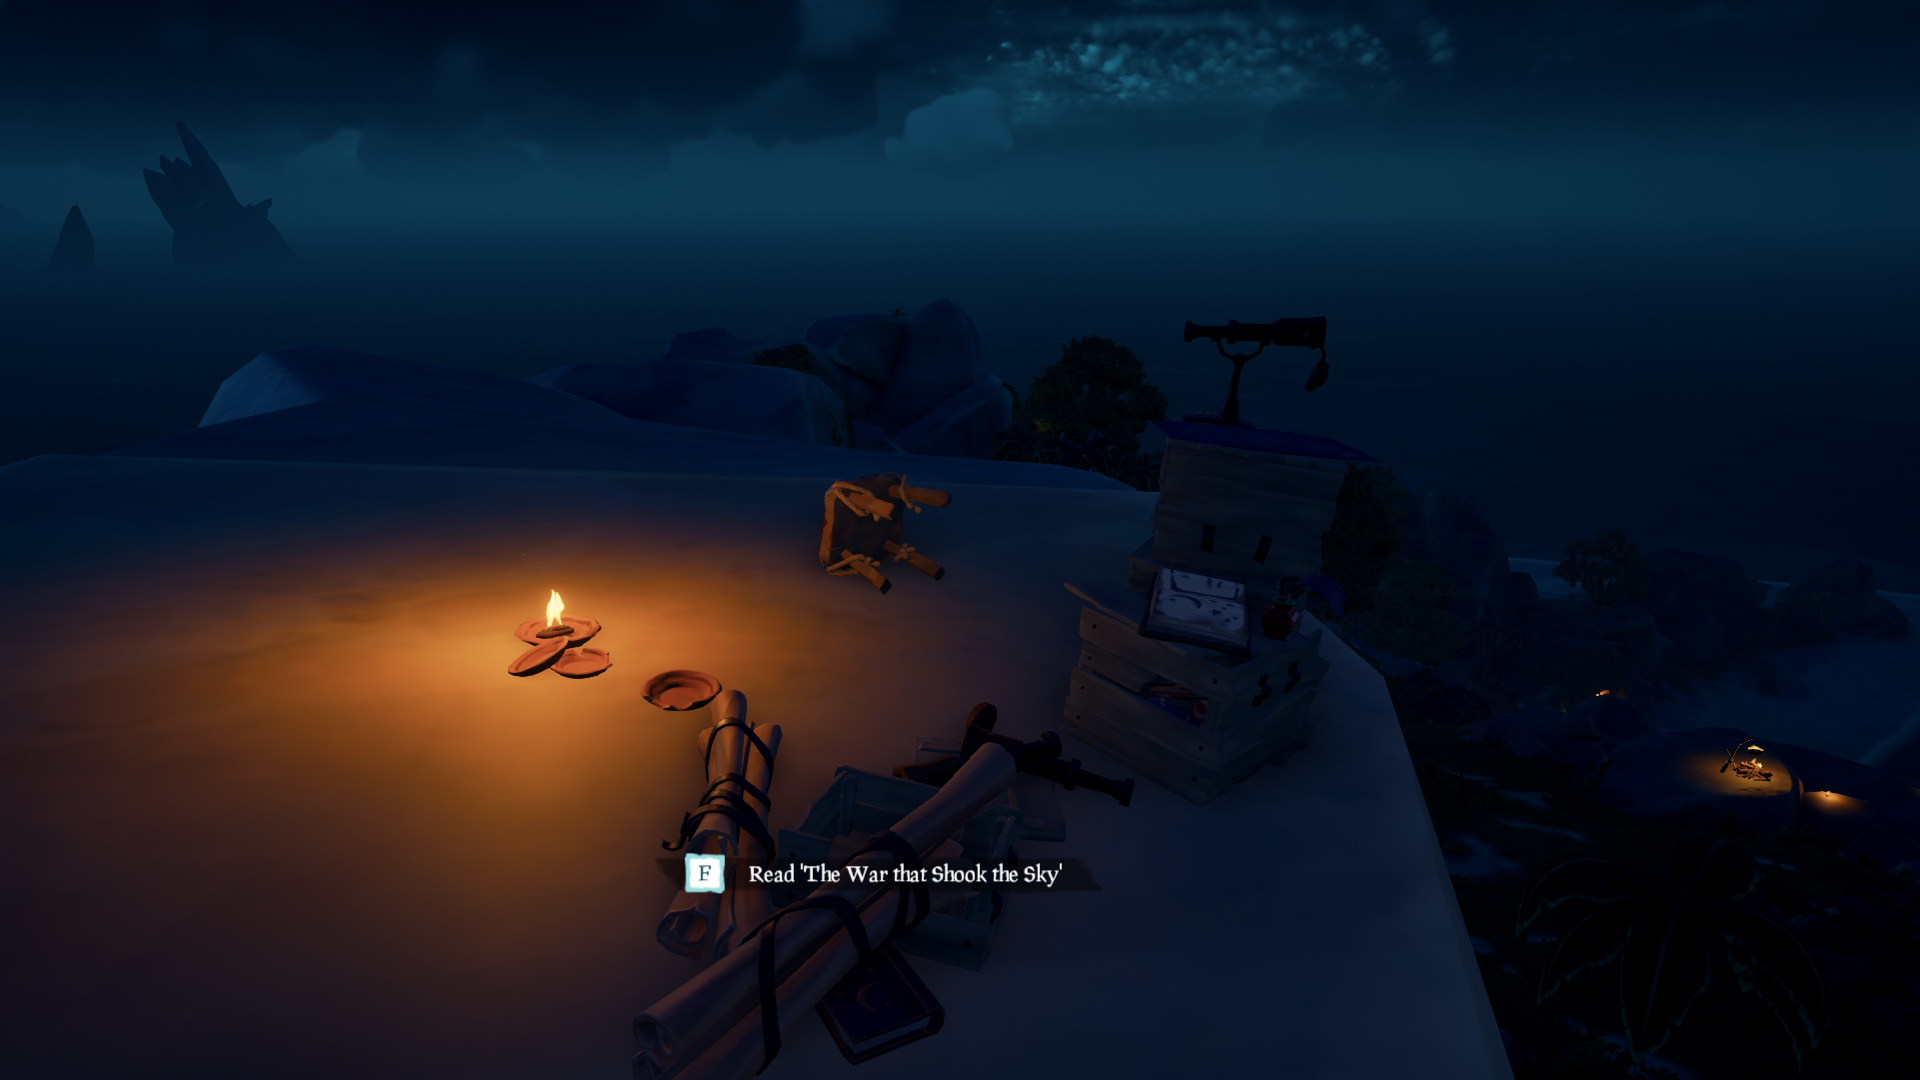 postbote-h-ndler-zustand-sea-of-thieves-stars-of-a-thief-crab-totem-puzzle-parameter-nicht